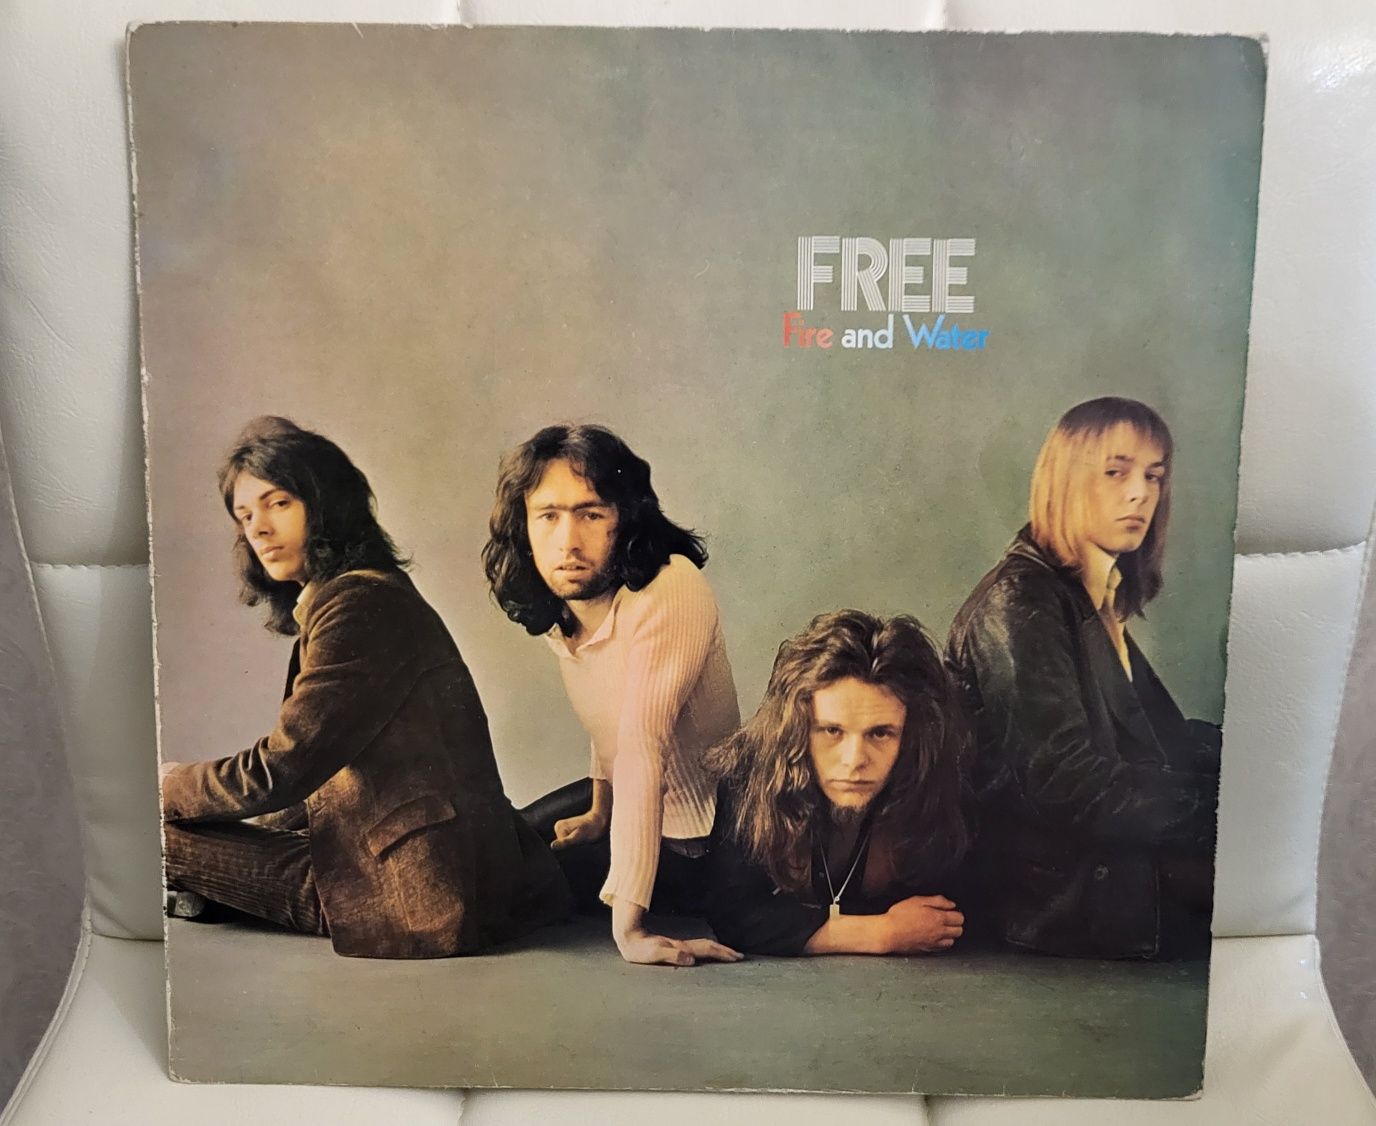 Free Fire and water (UK 1st press) 1970